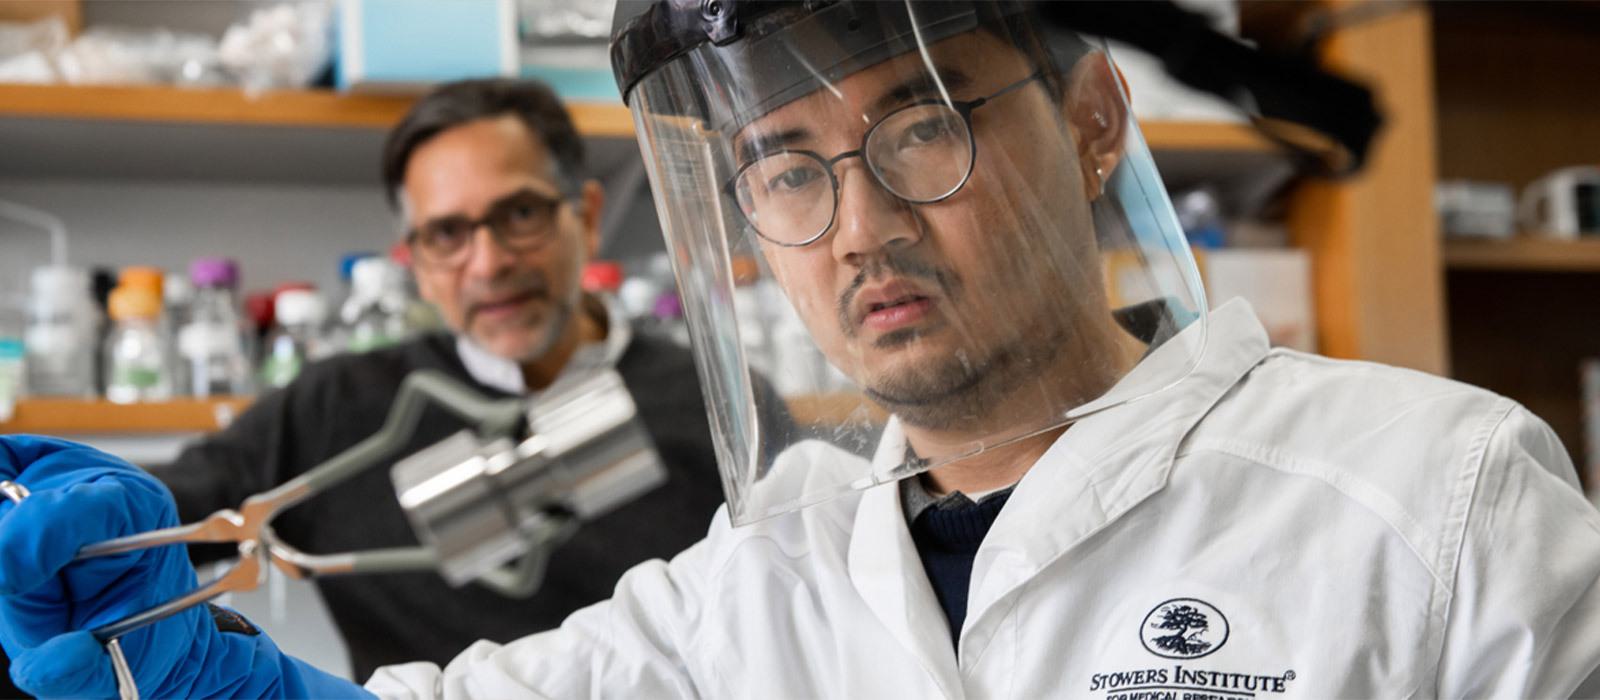 Scientist in lab jacket and face shield holding up metal object